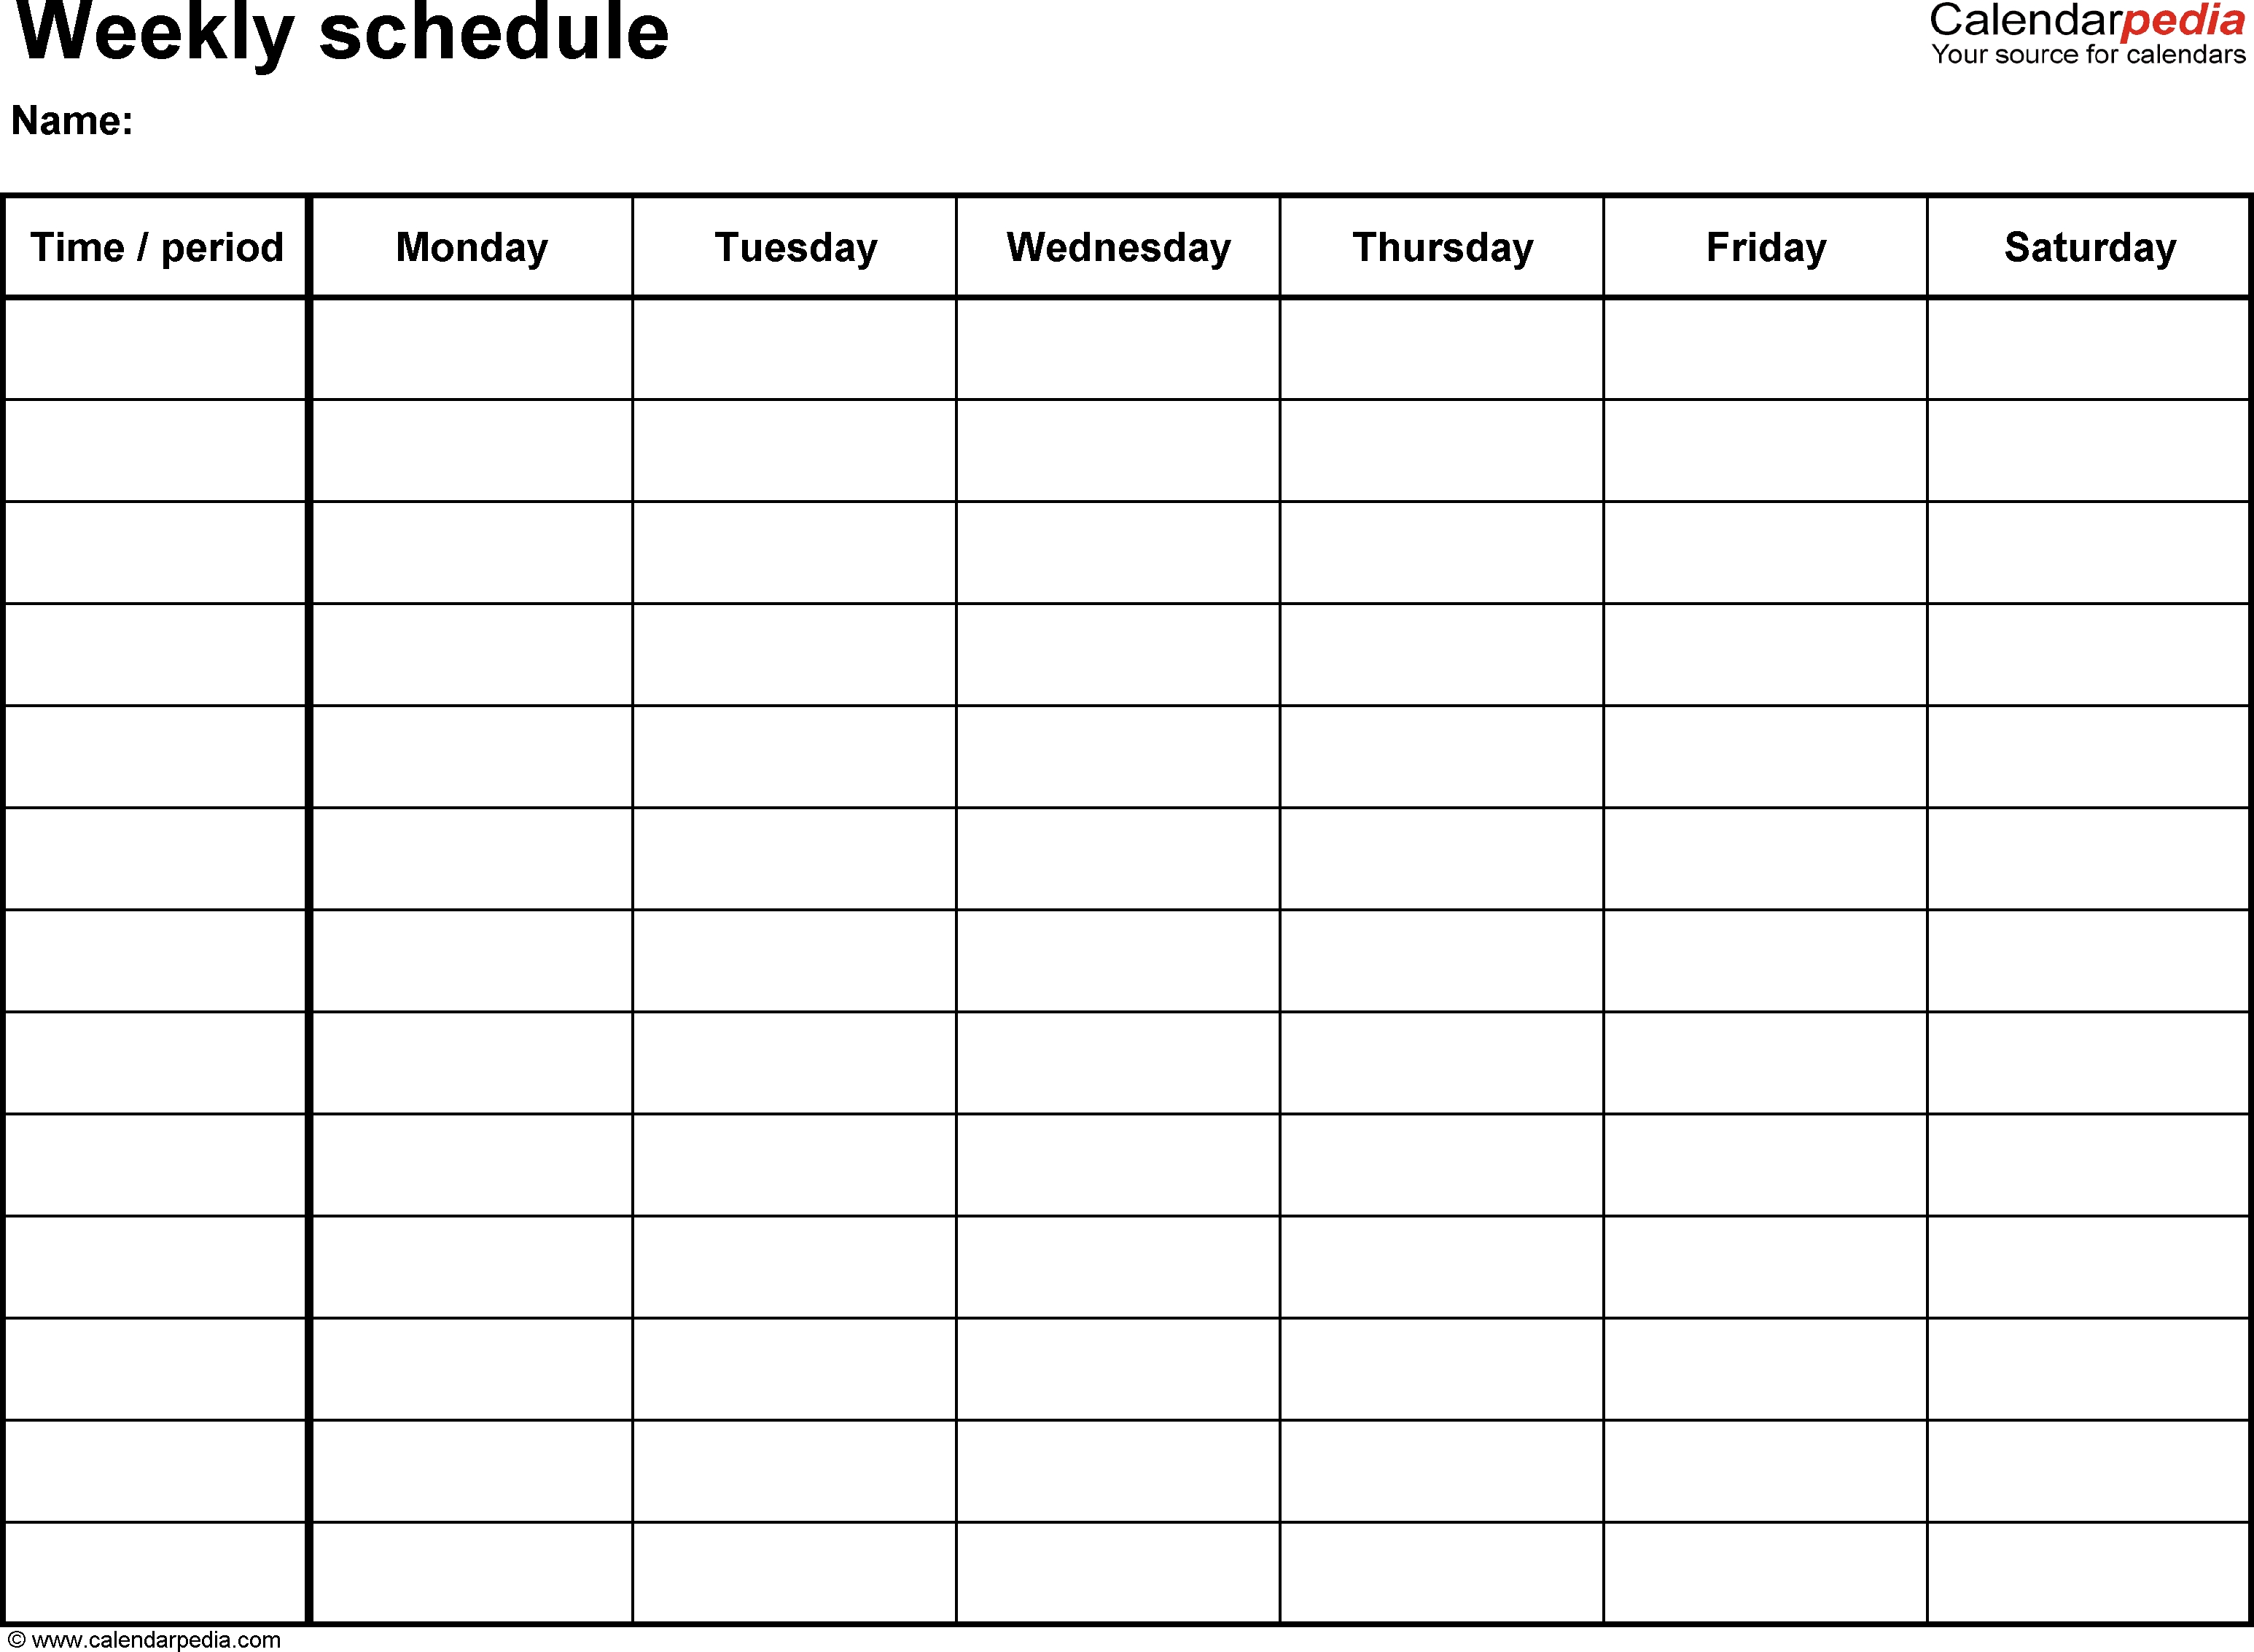 Free Weekly Schedule Templates For Pdf - 18 Templates throughout Printable Schedule Template For Pages